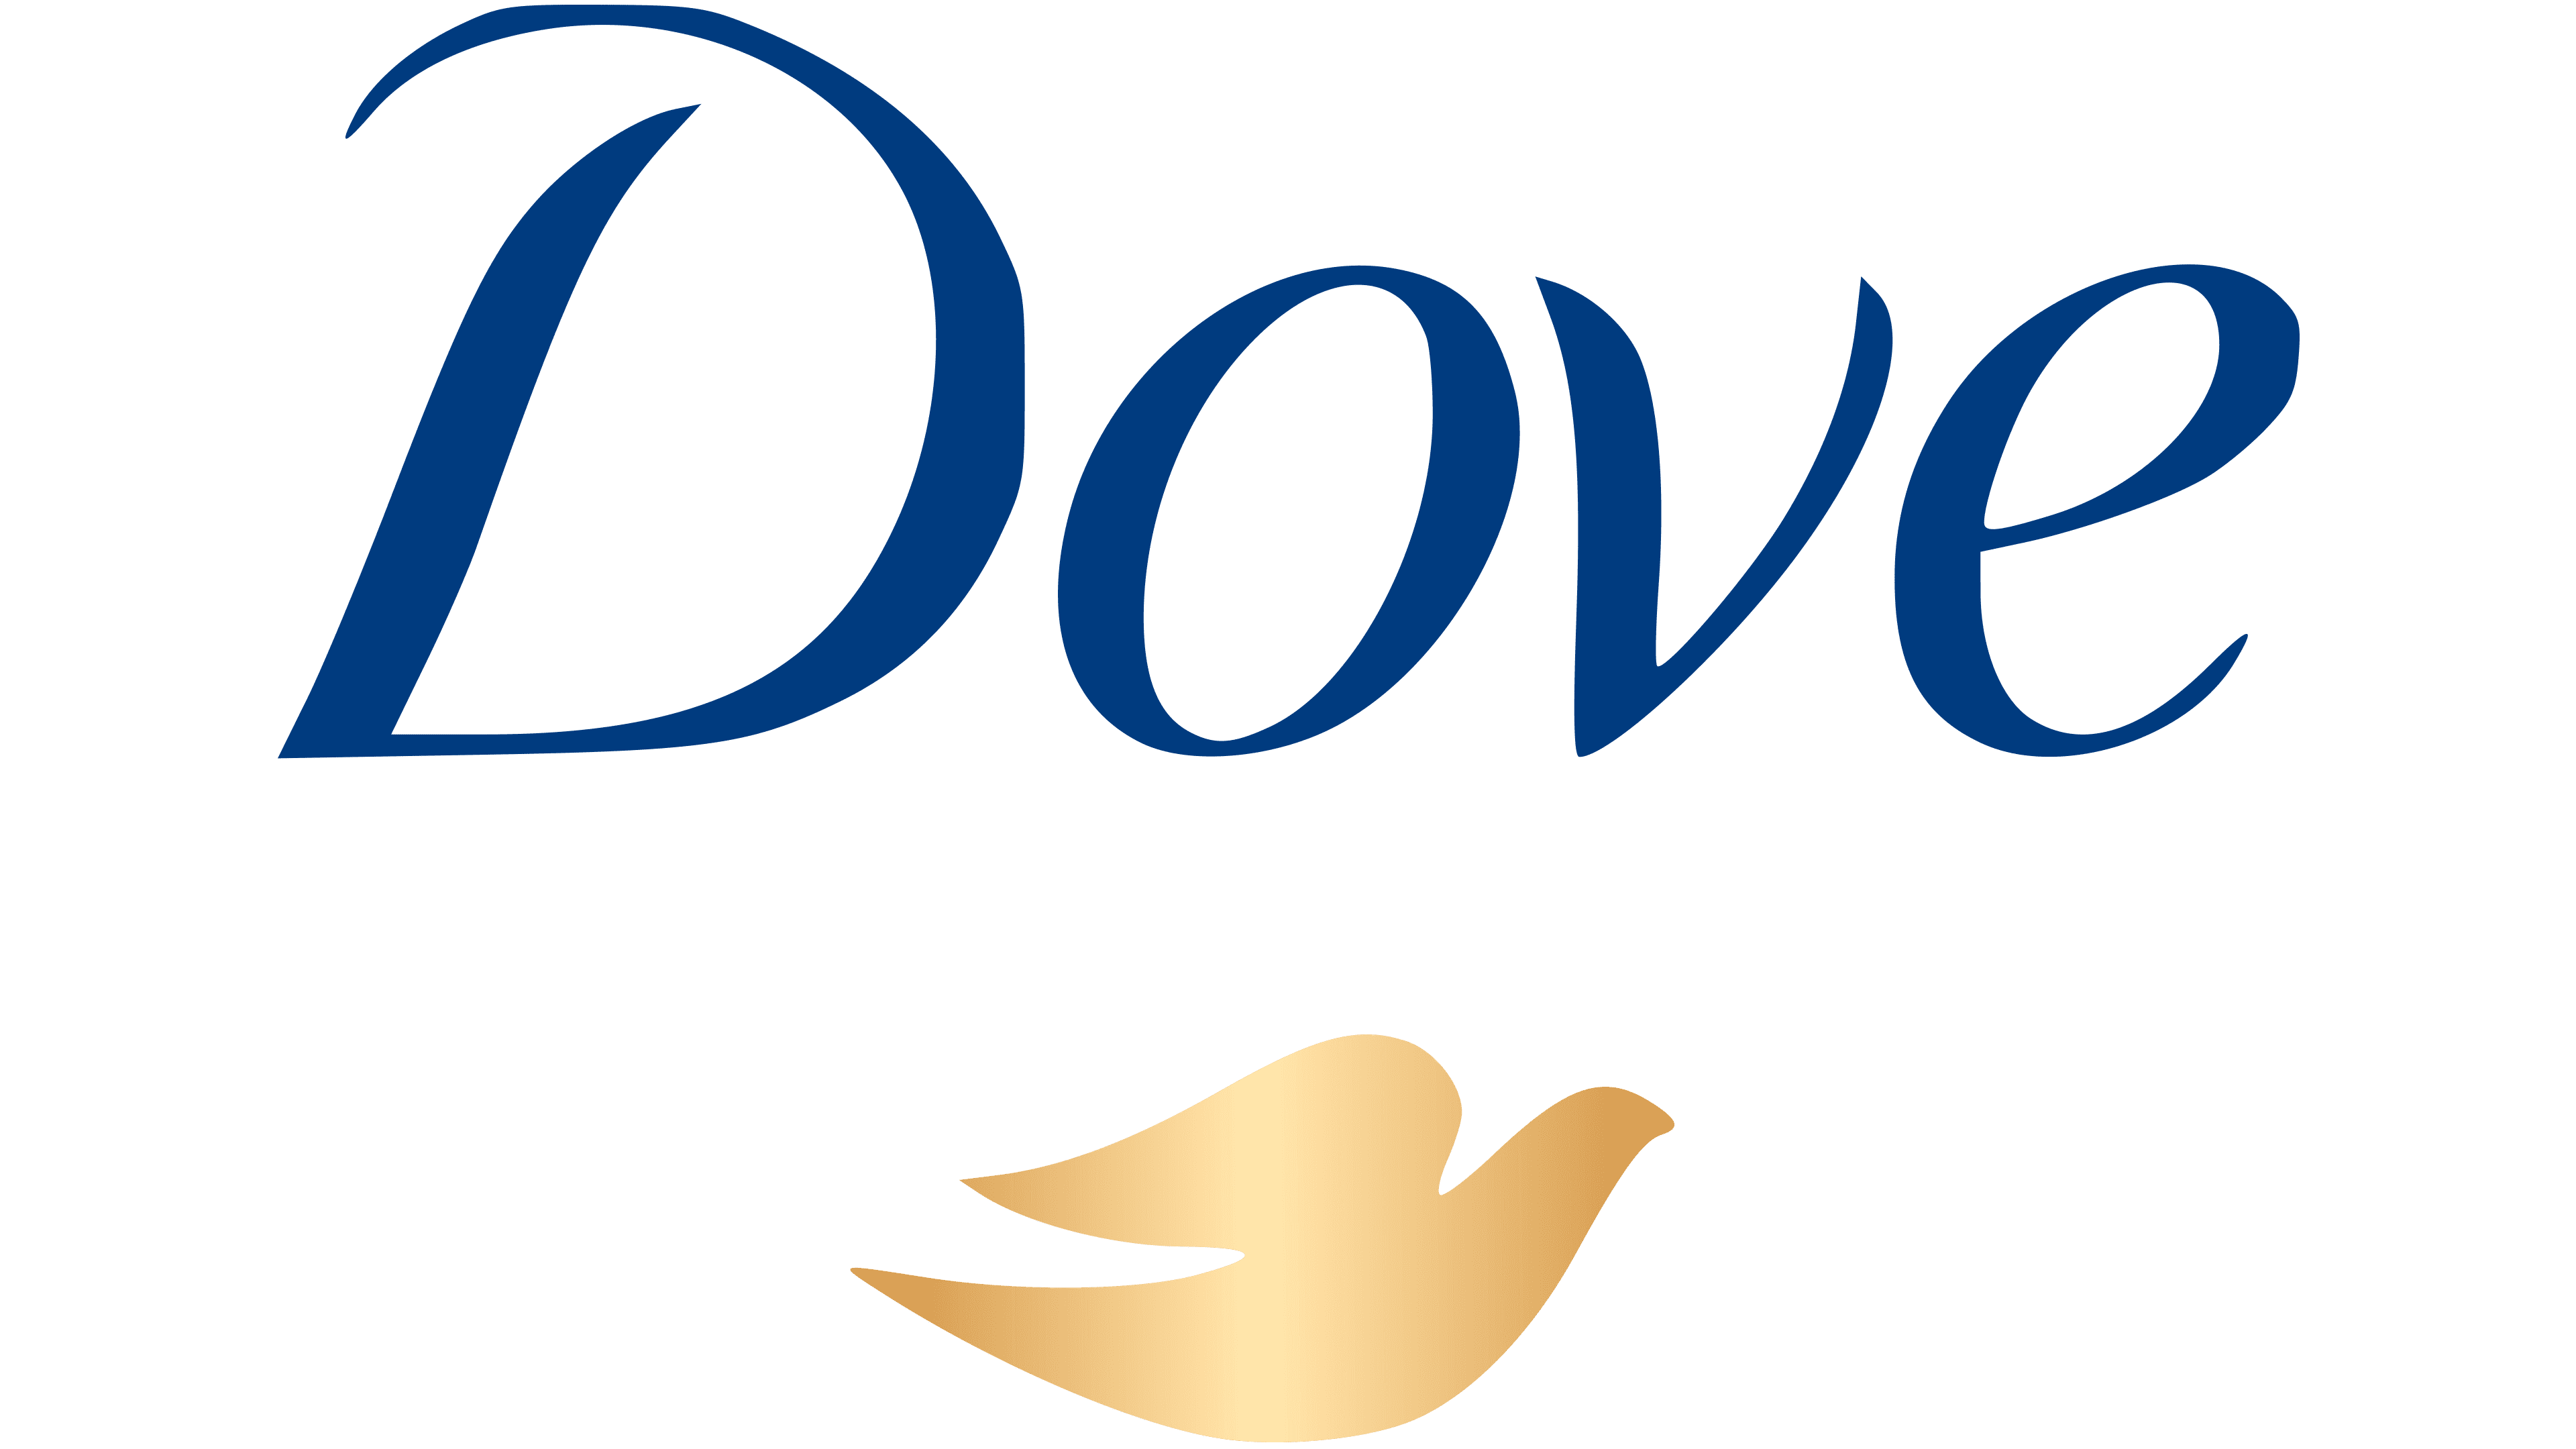 Dove Logo, PNG, Symbol, History, Meaning